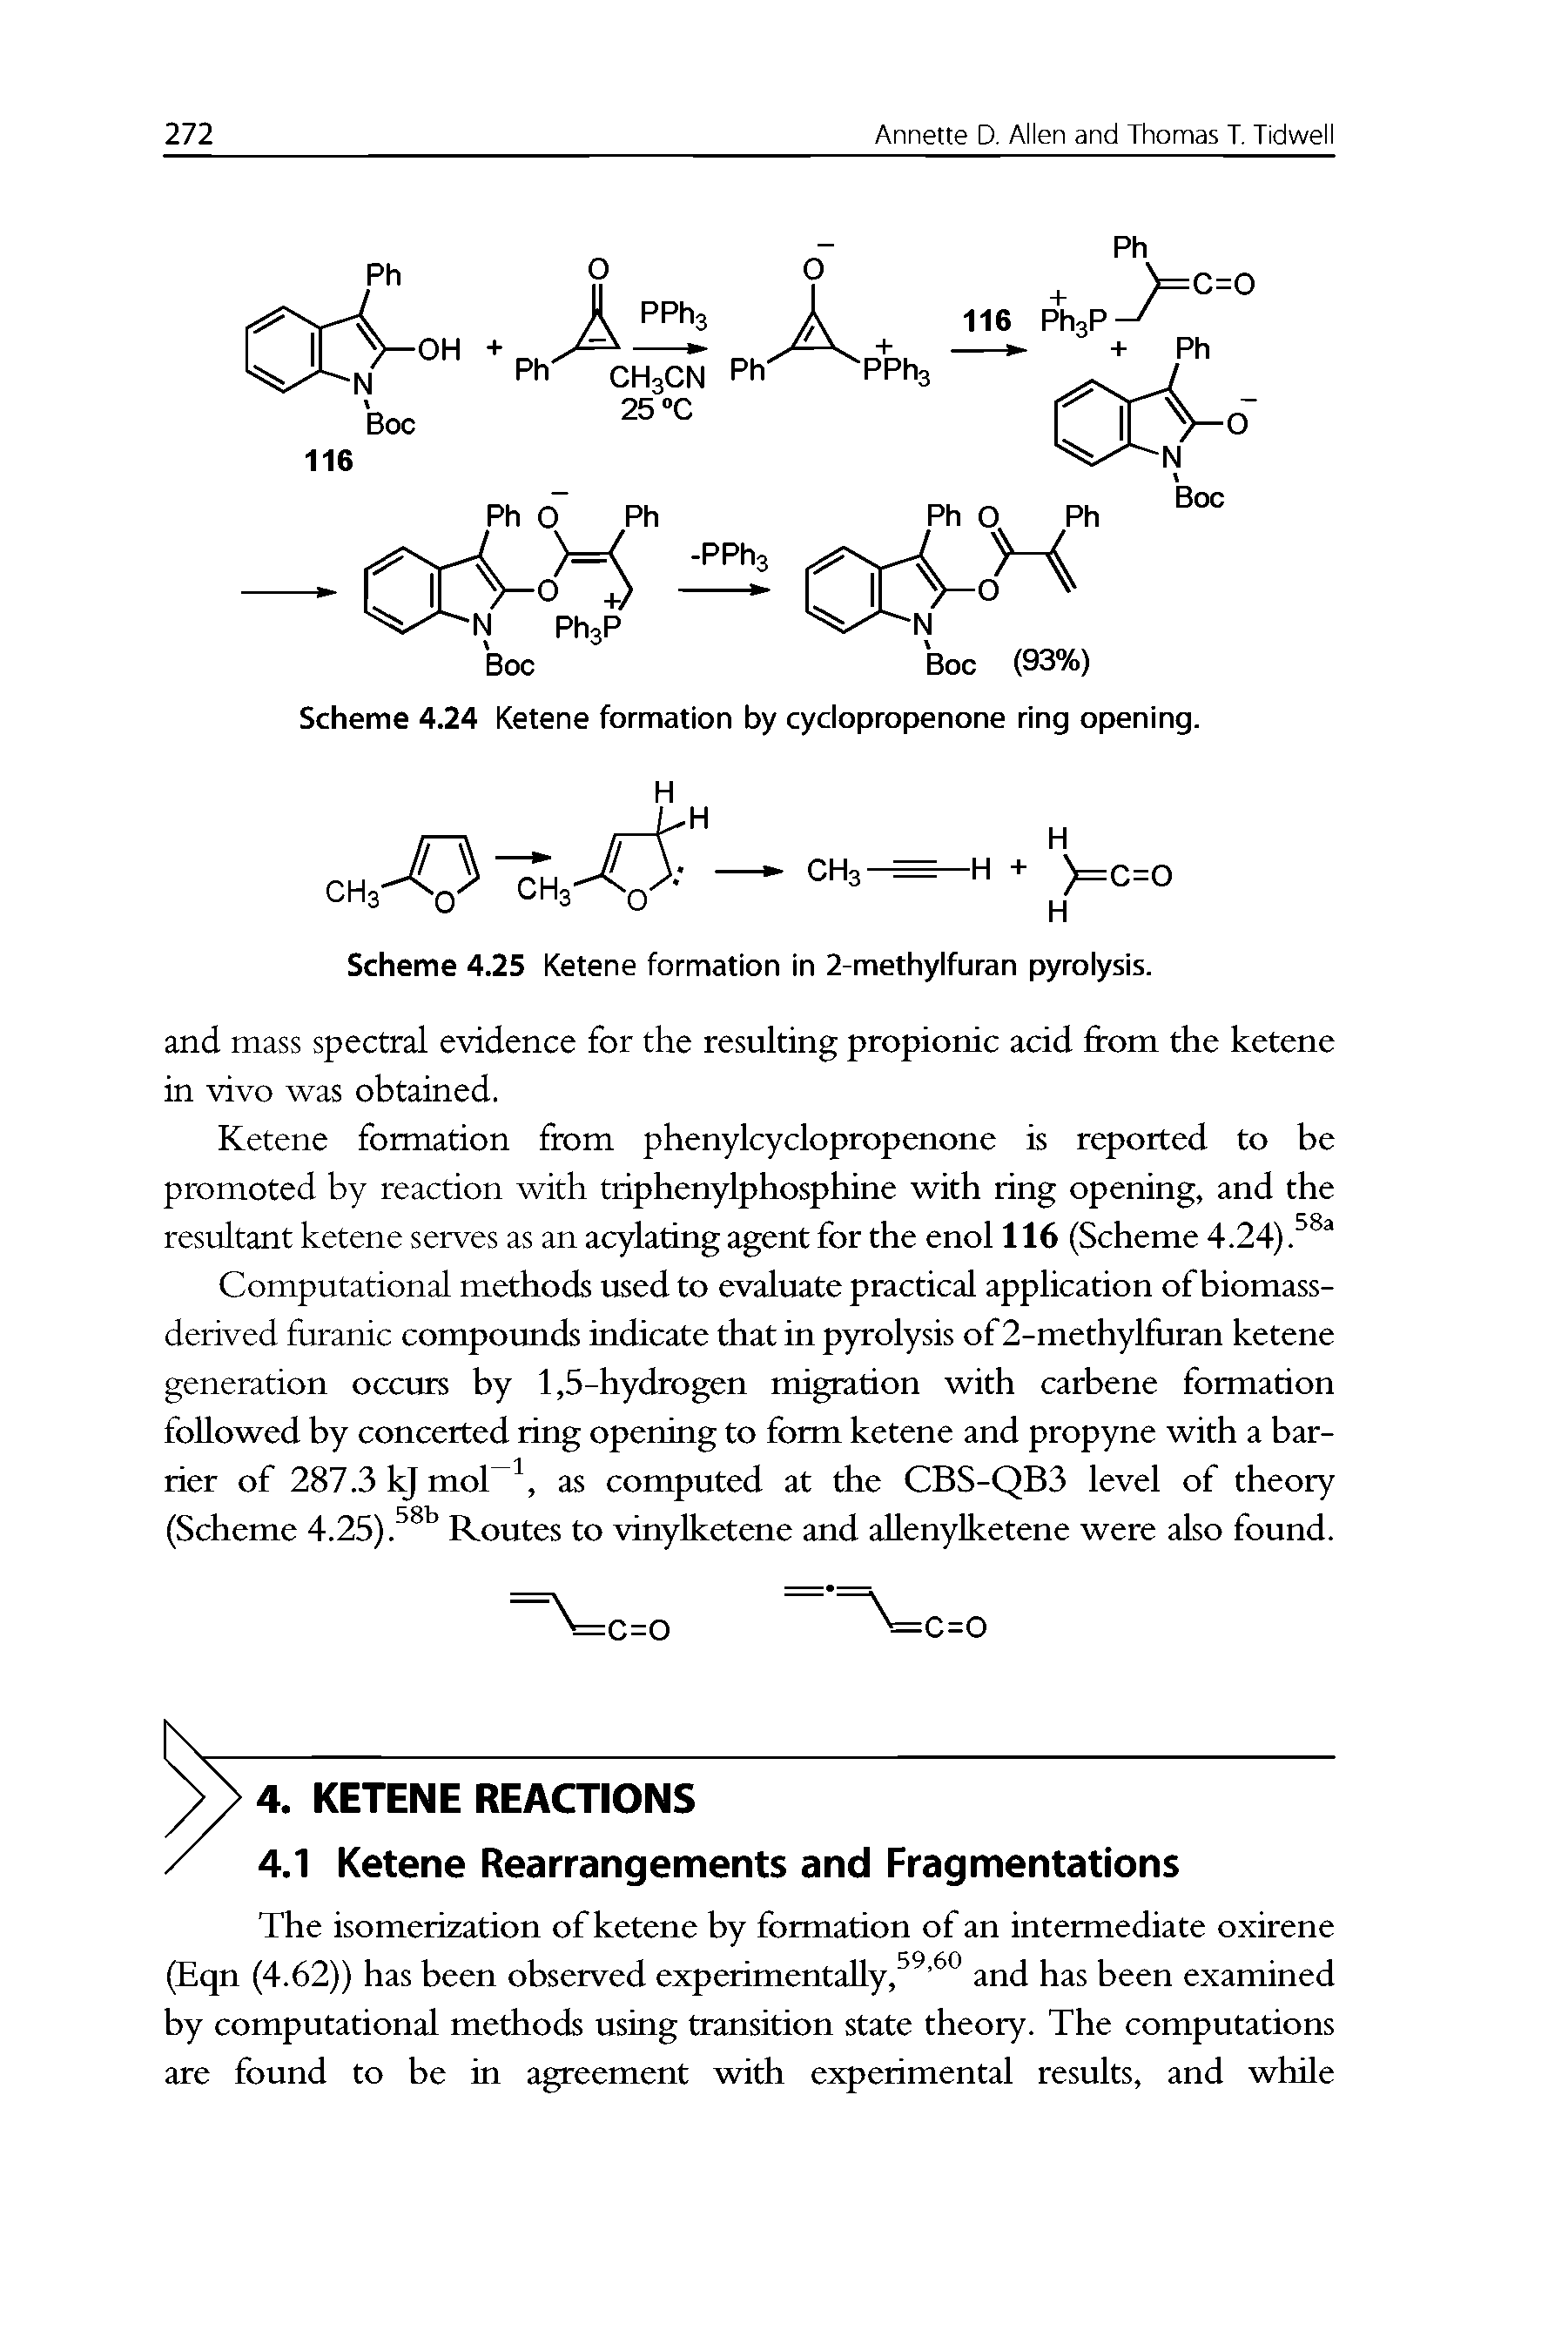 Scheme 4.24 Ketene formation by cyclopropenone ring opening. H...